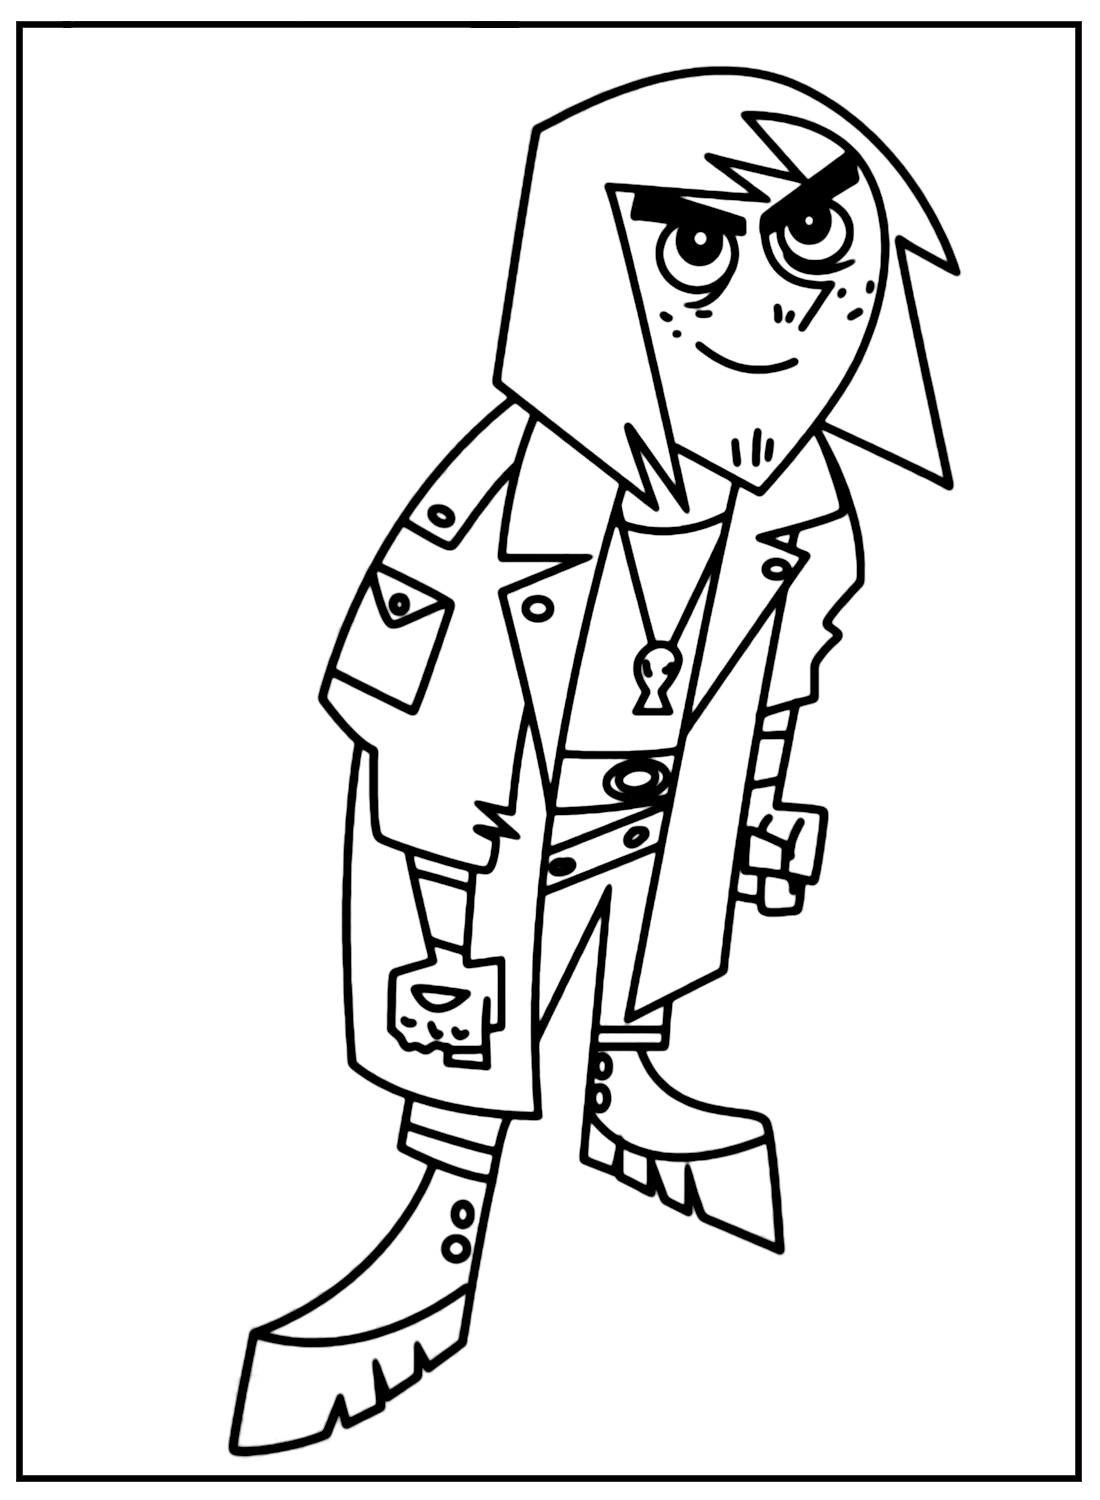 Johnny 13 From Danny Phantom Coloring Pages